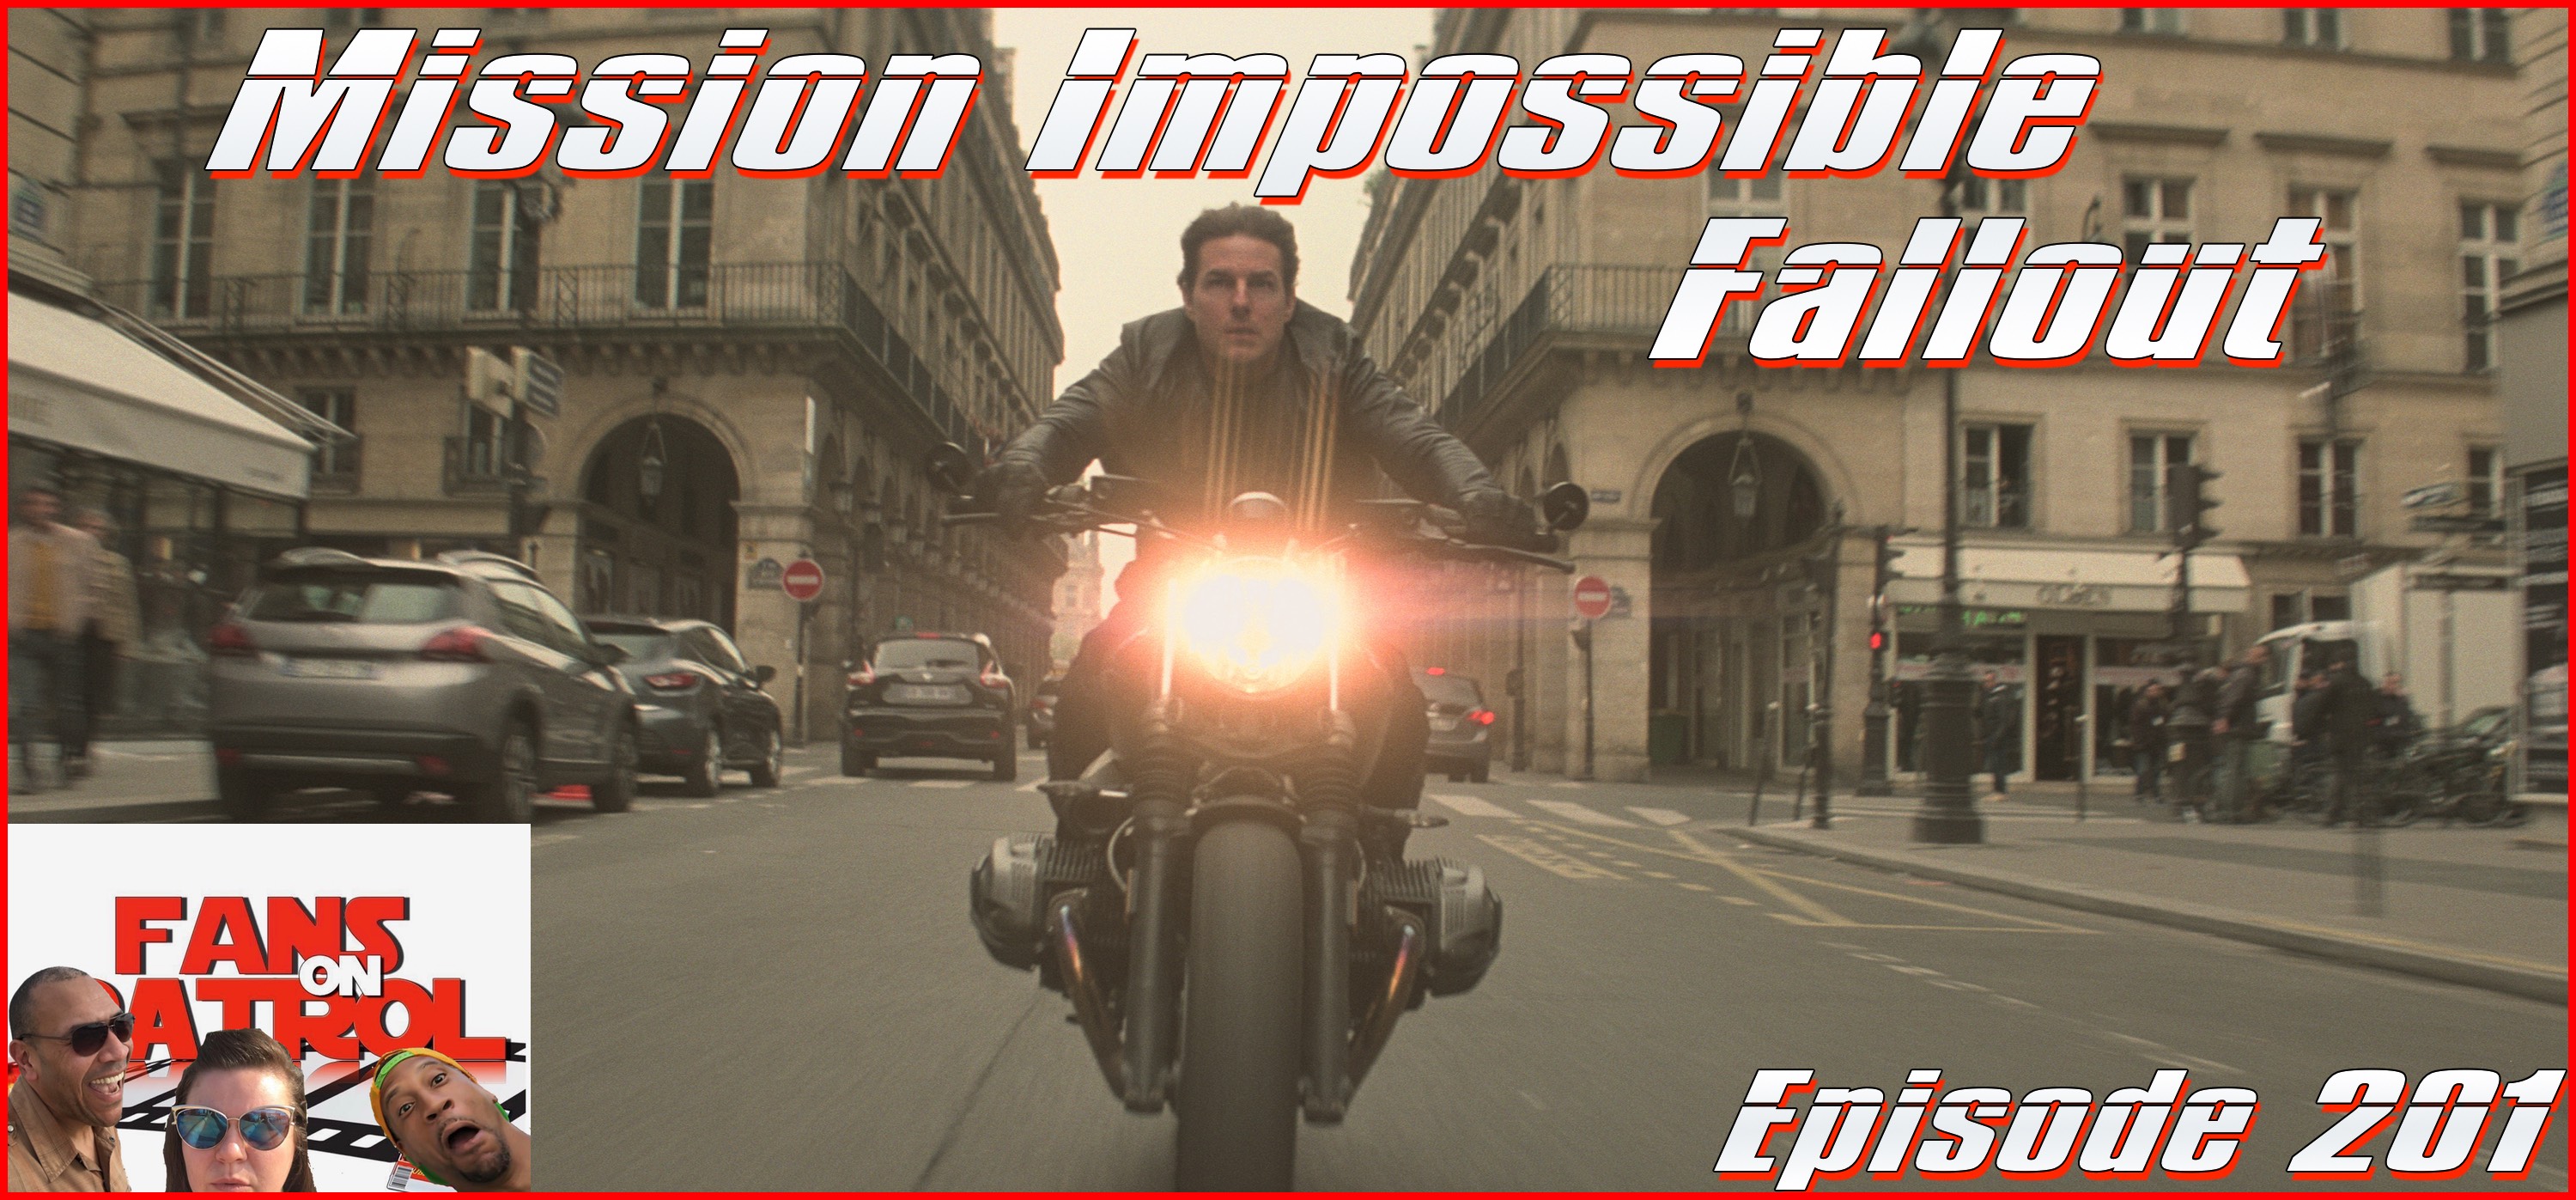 Mission Impossible Fallout Episode 201